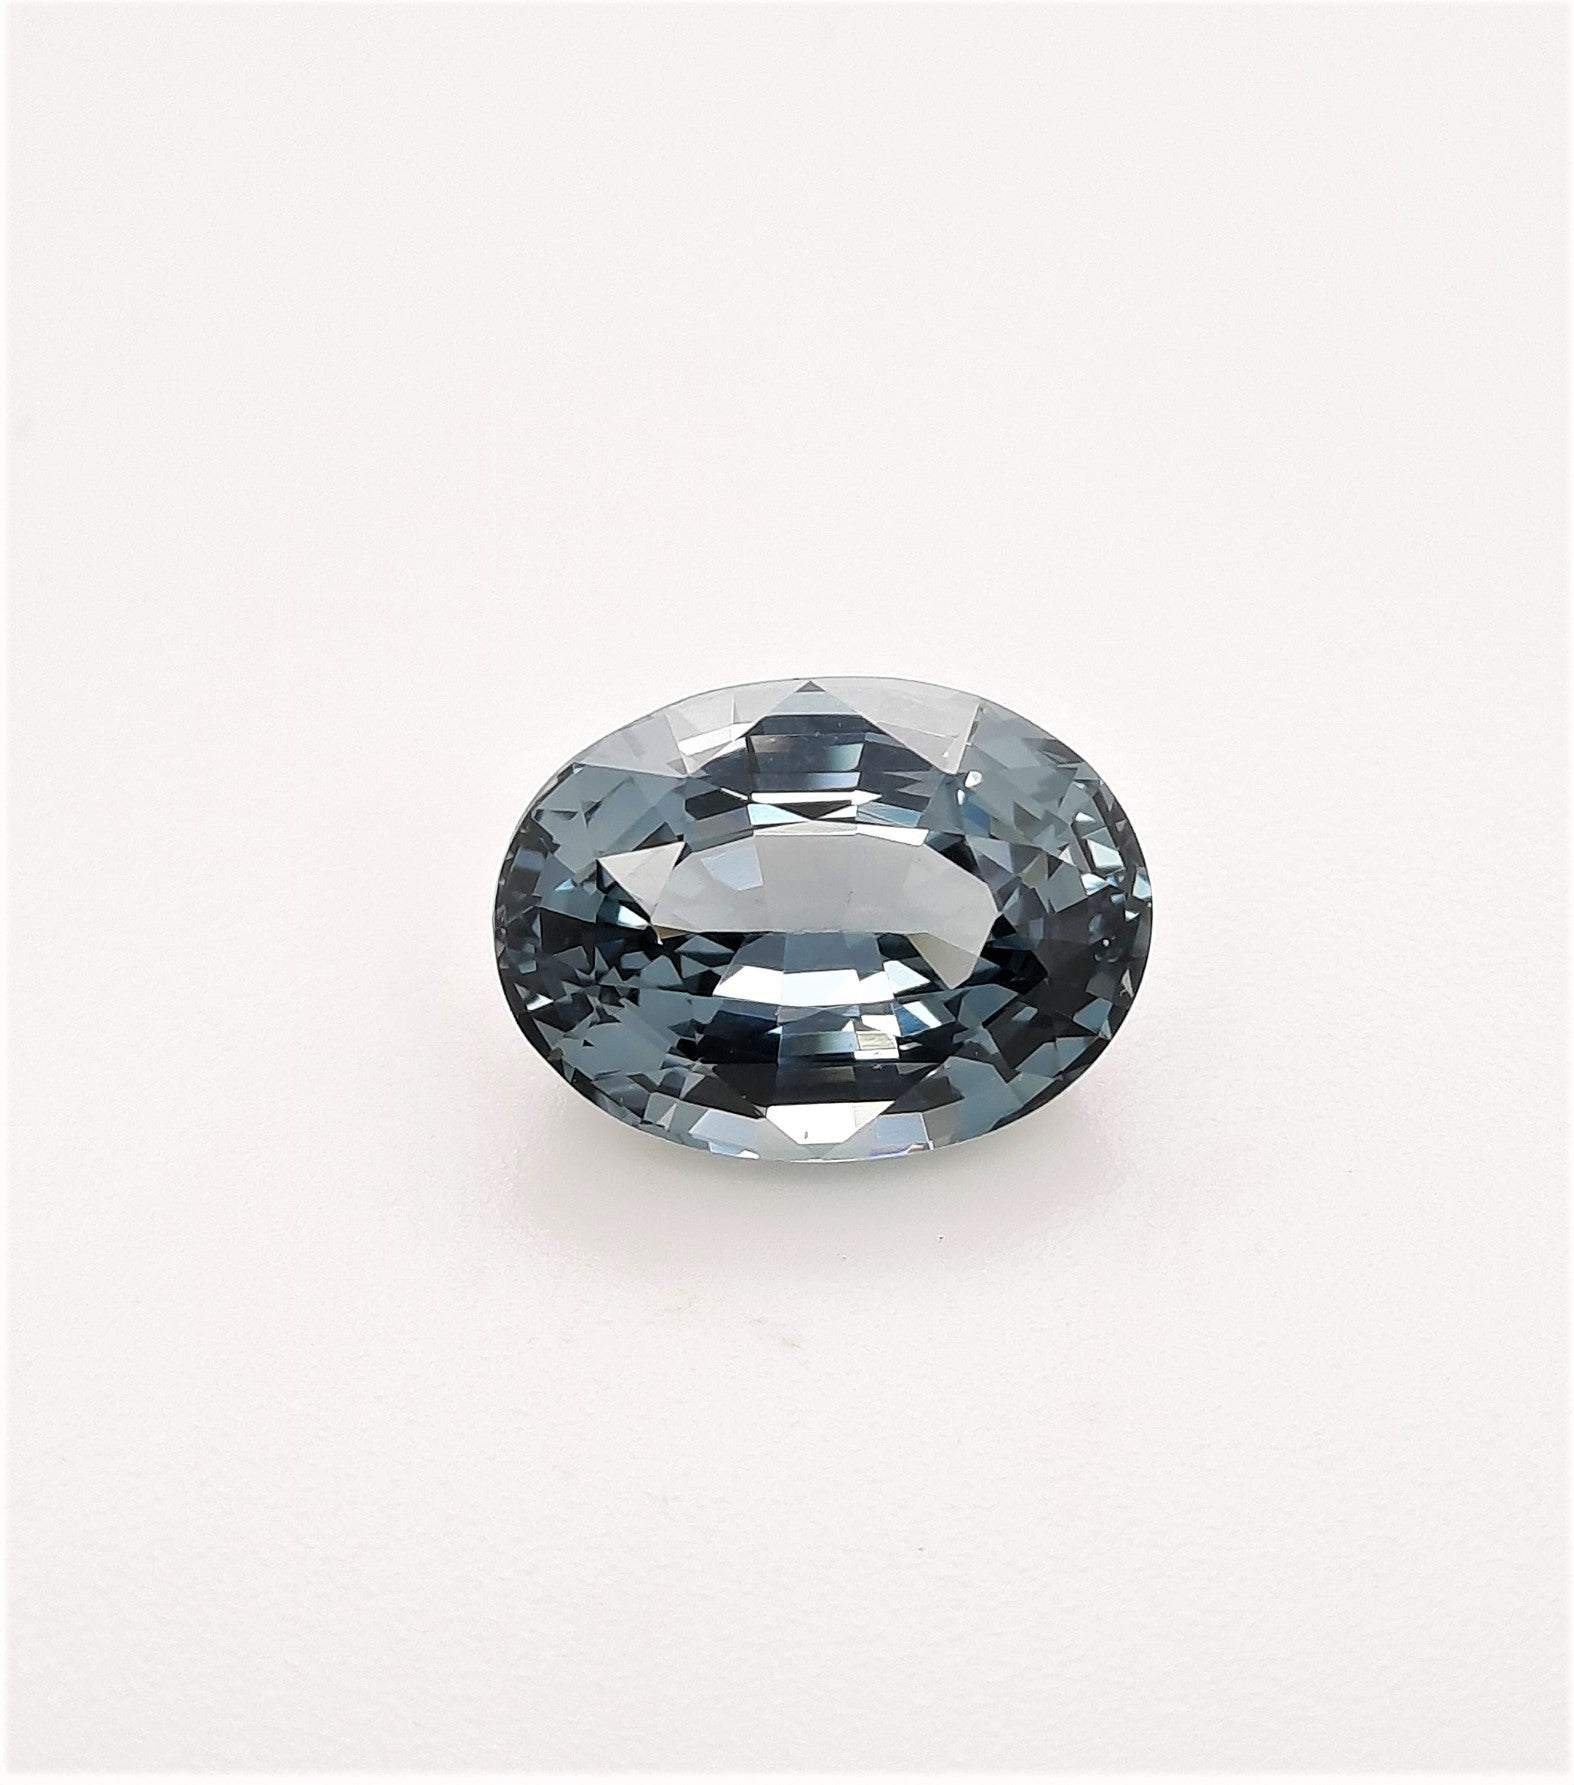 Grey Spinel 3.59ct Oval